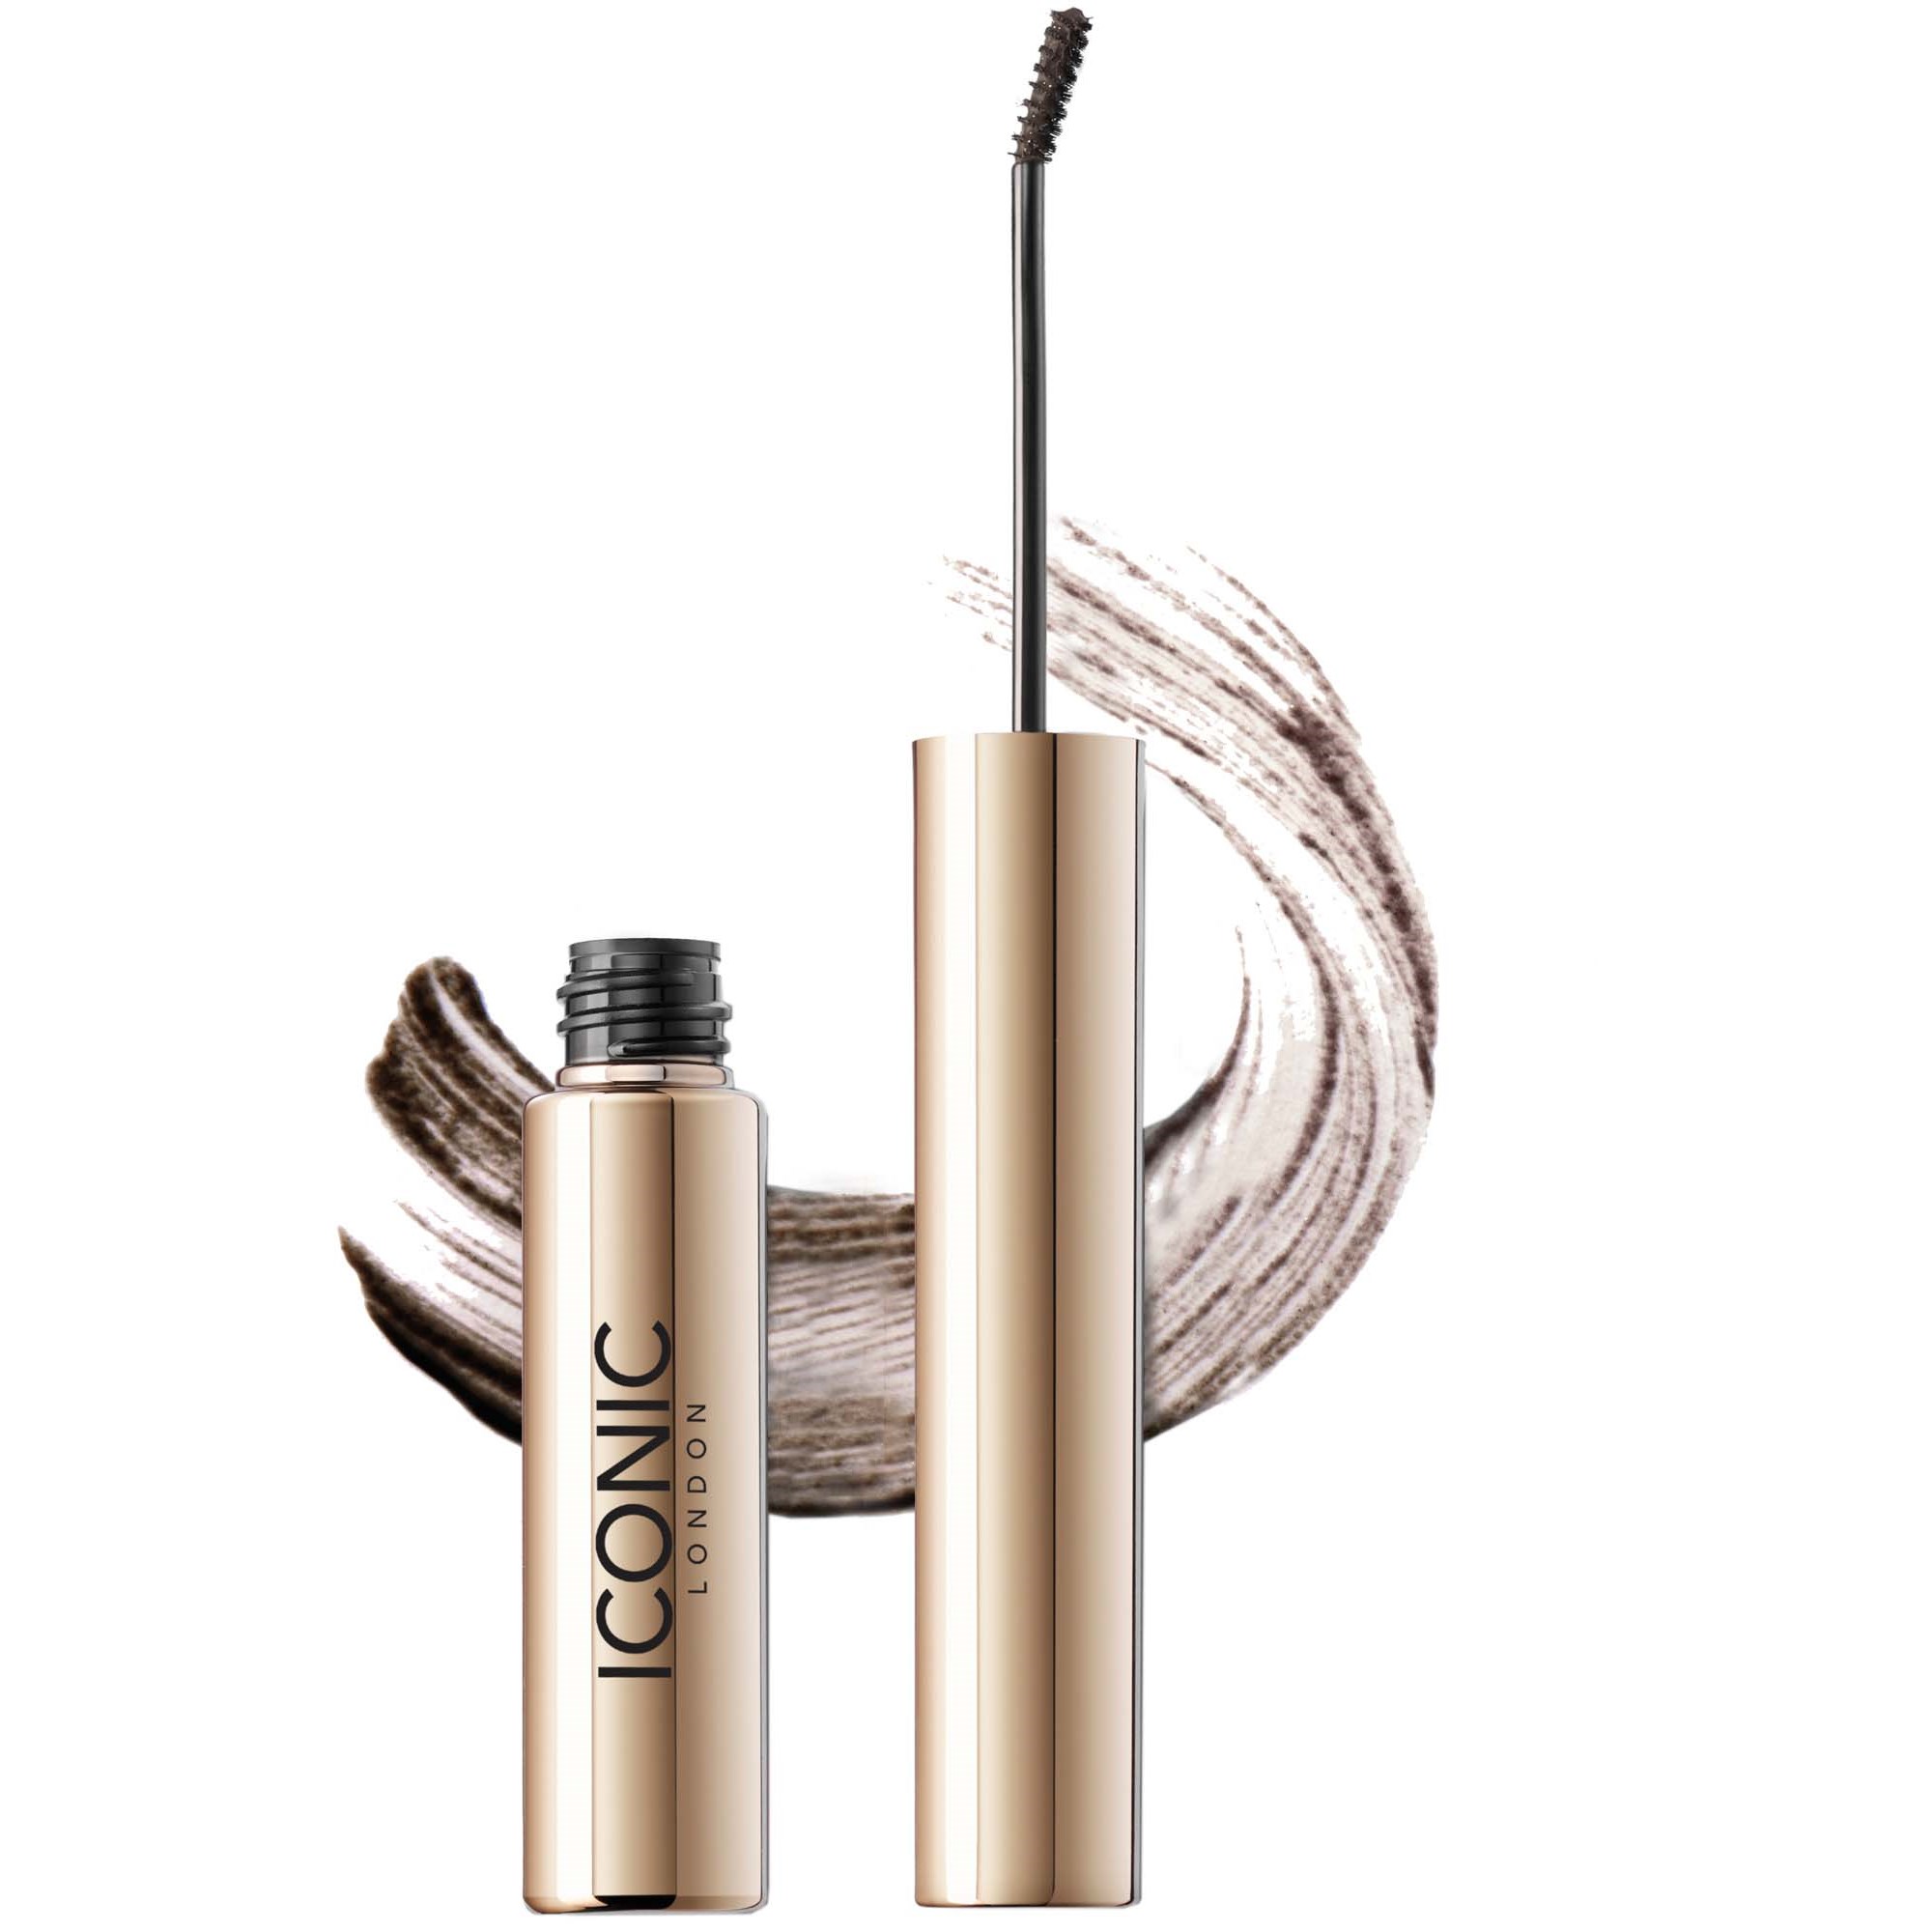 Läs mer om ICONIC London Brow Gel Tint and Texture Ash Blonde